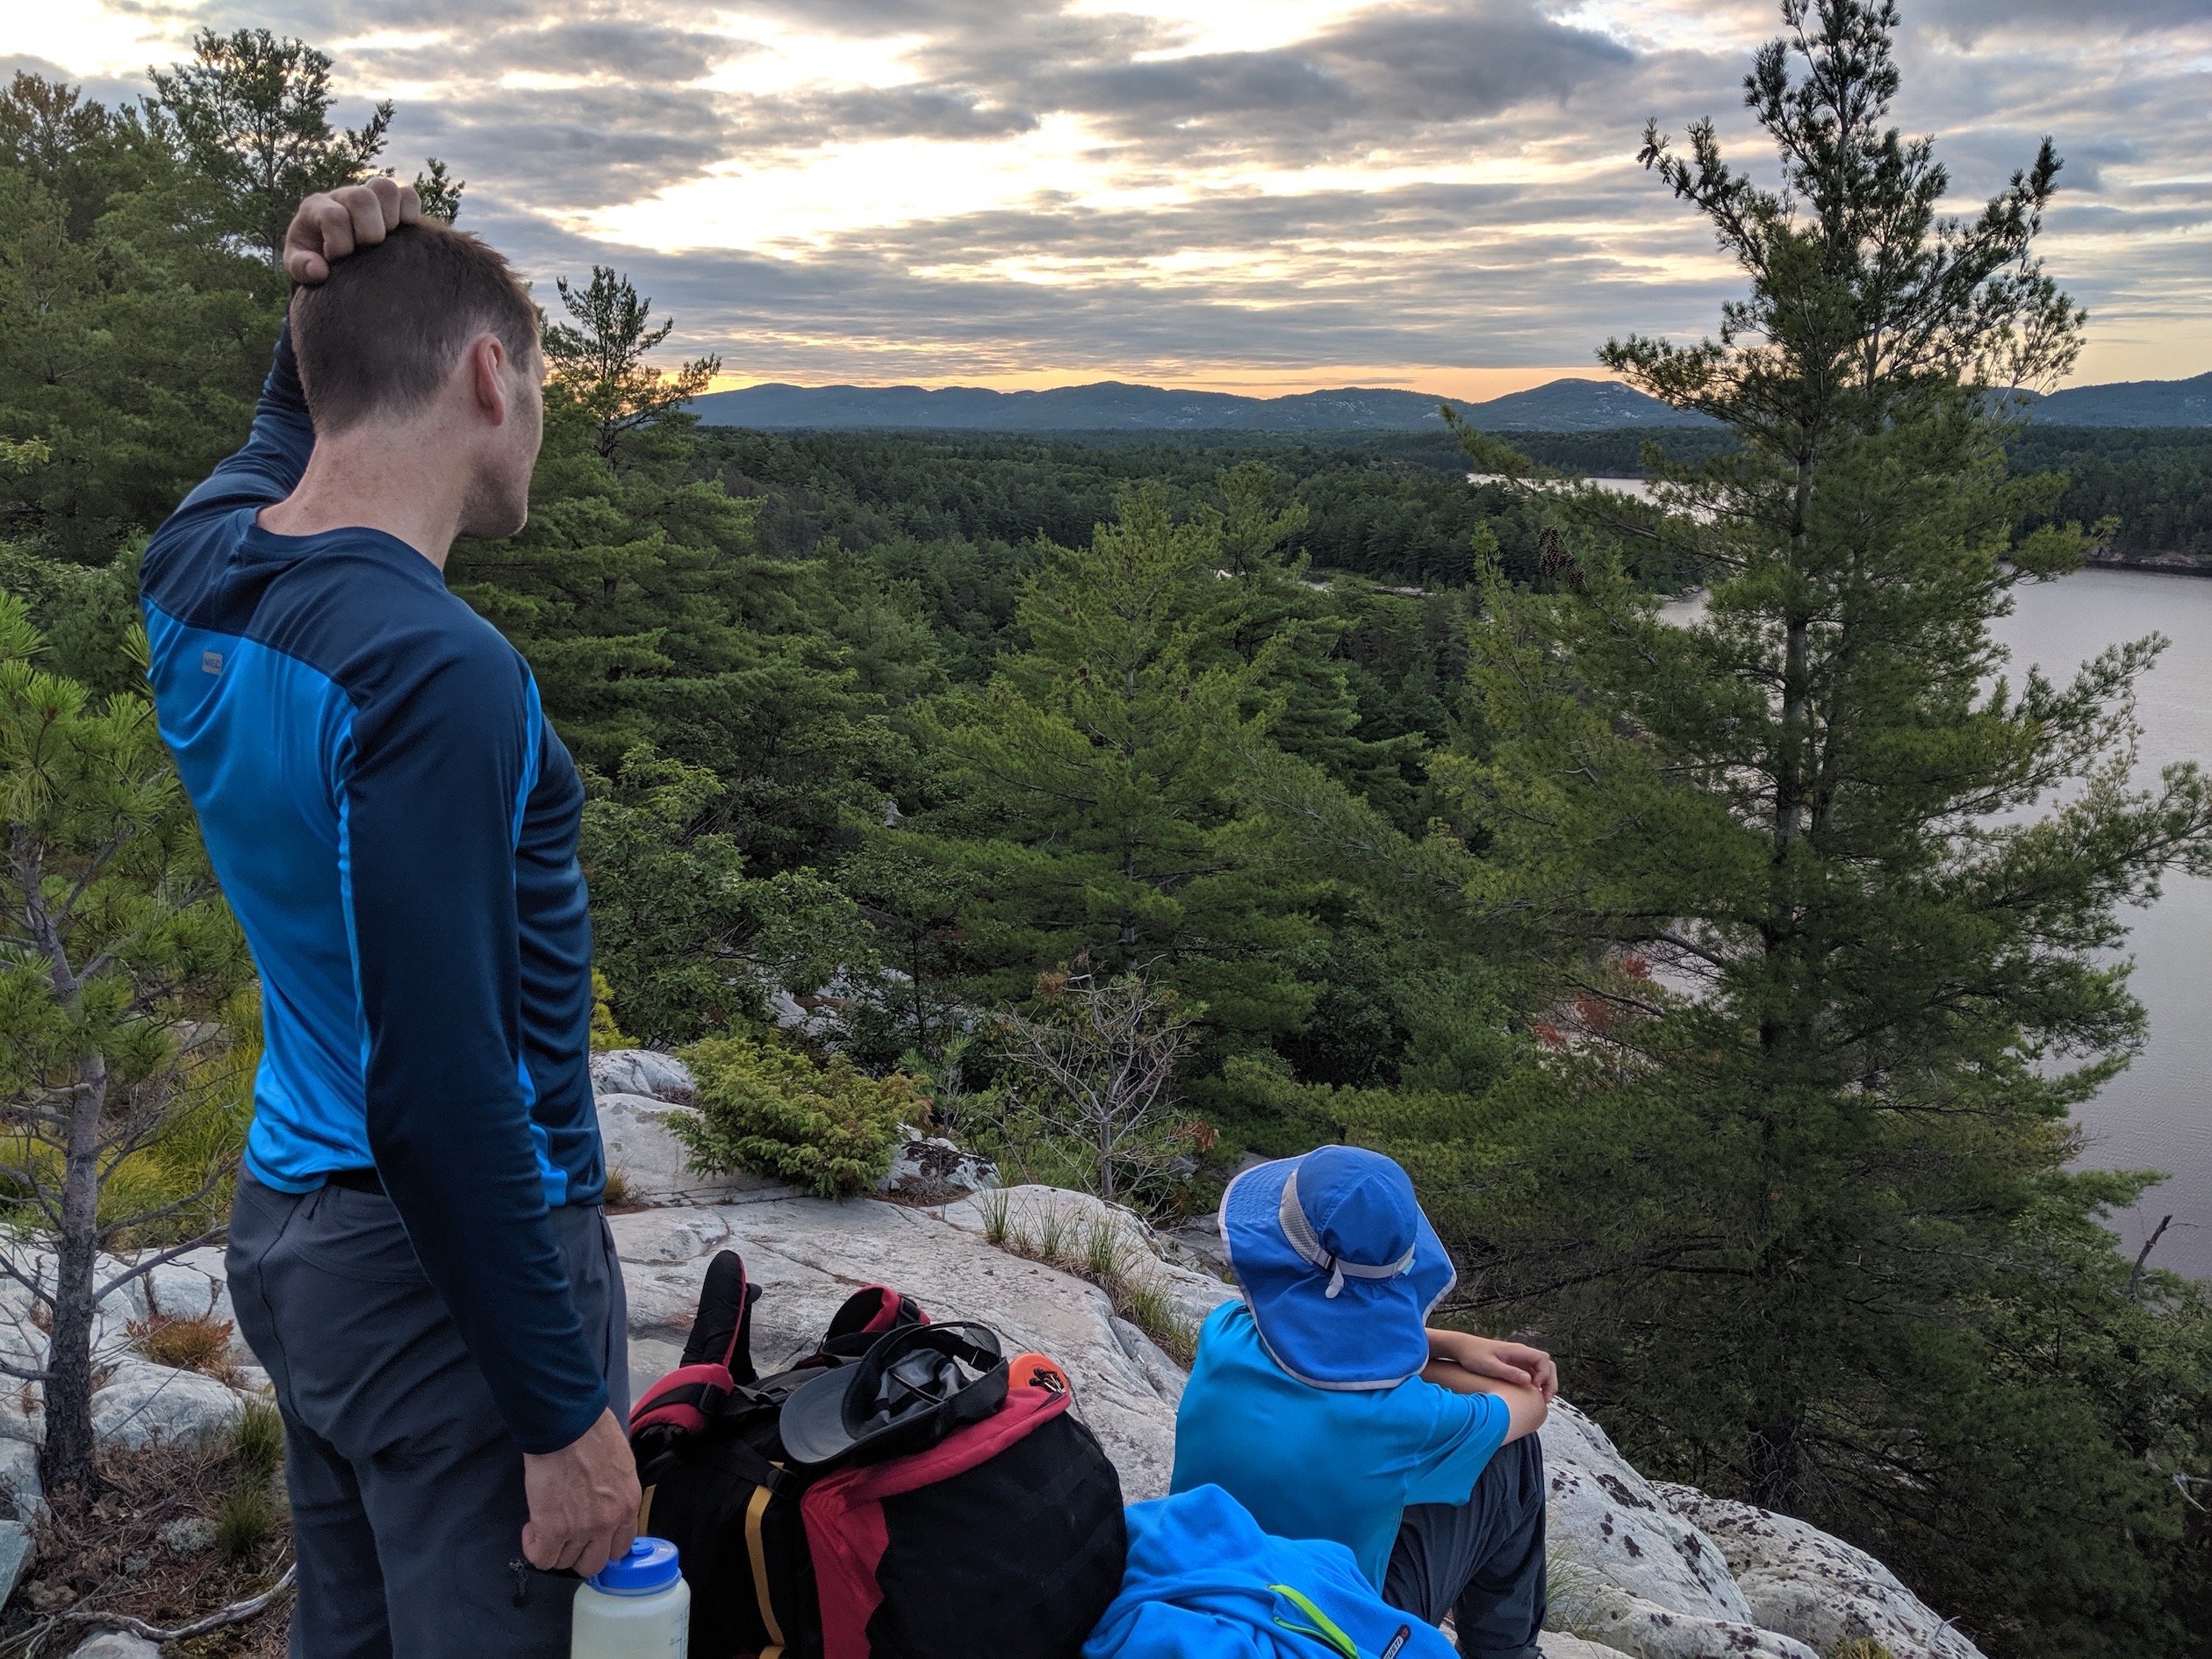 My husband and 13-year old up high on a rock at sunrise, overlooking trees and lakes.